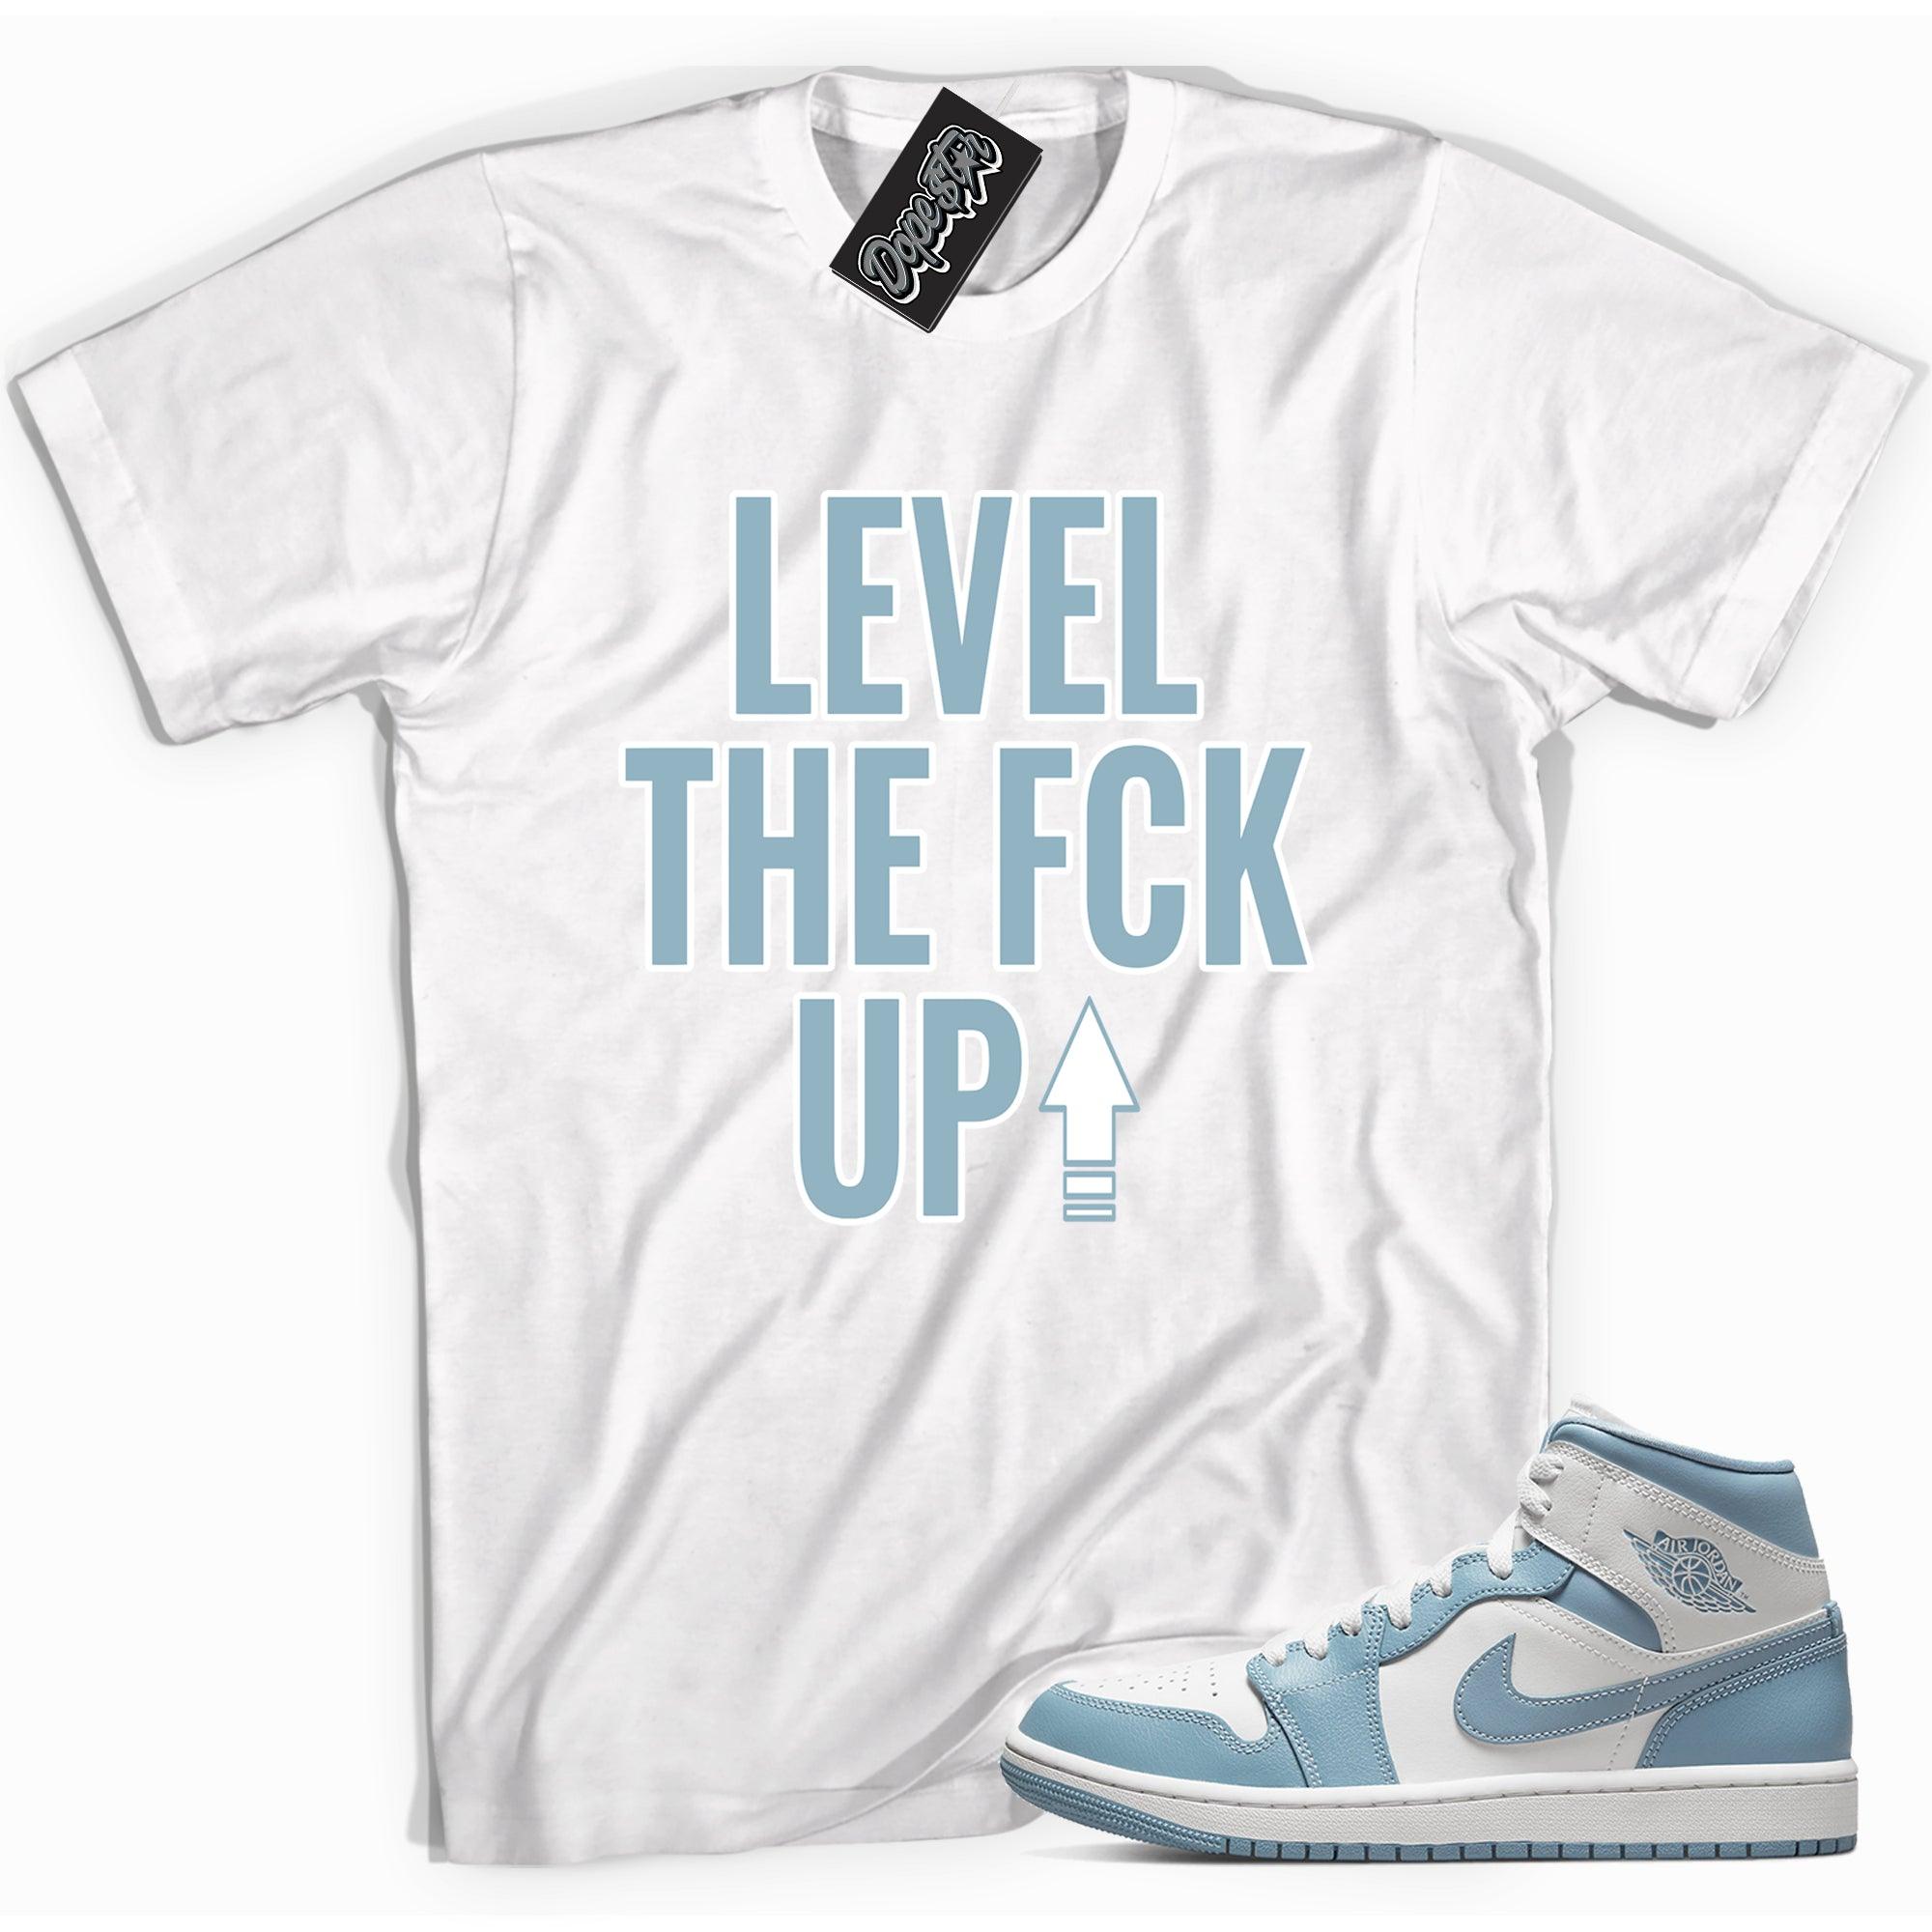 Cool white graphic tee with 'Level Up' print, that perfectly matches Air Jordan 1 Mid UNC sneakers.